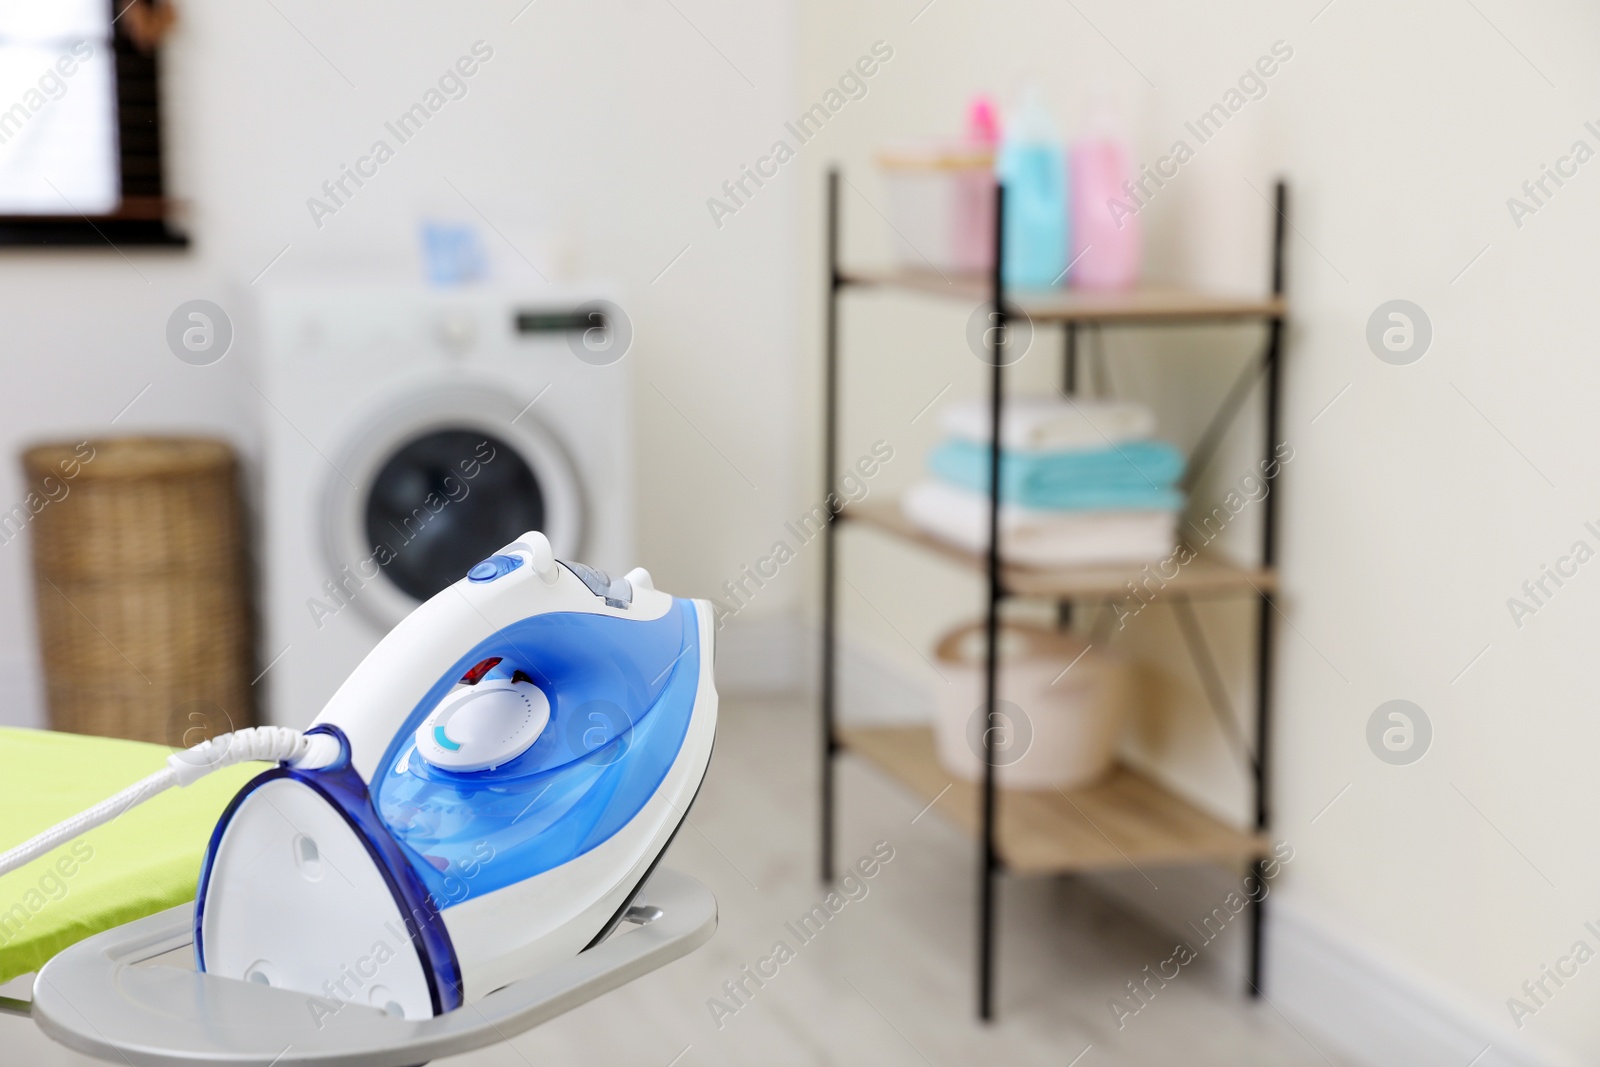 Photo of Modern clothes iron on board in laundry room